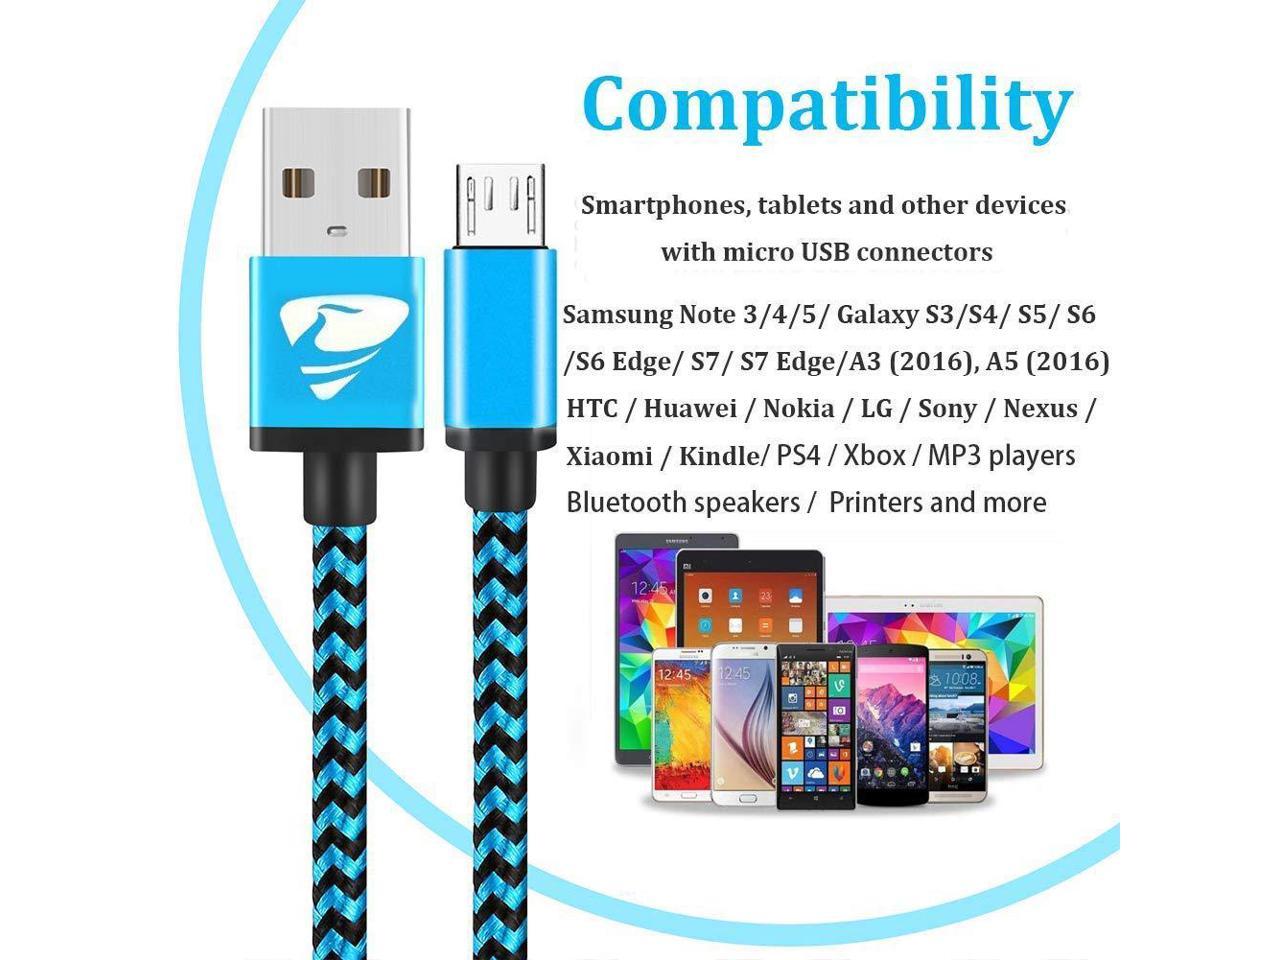 Micro USB Cable Canjoy 3 Pack USB to Micro USB Cable 6ft Braided Android Charger Fast Charging Cord Compatible Samsung Galaxy S7 S6 Edge J7,Motorola,LG,Nexus,Nokia,Sony,HTC,Xbox,PS4,Tablet,Camera,MP3 and More Android Devices Blue Rose Purple